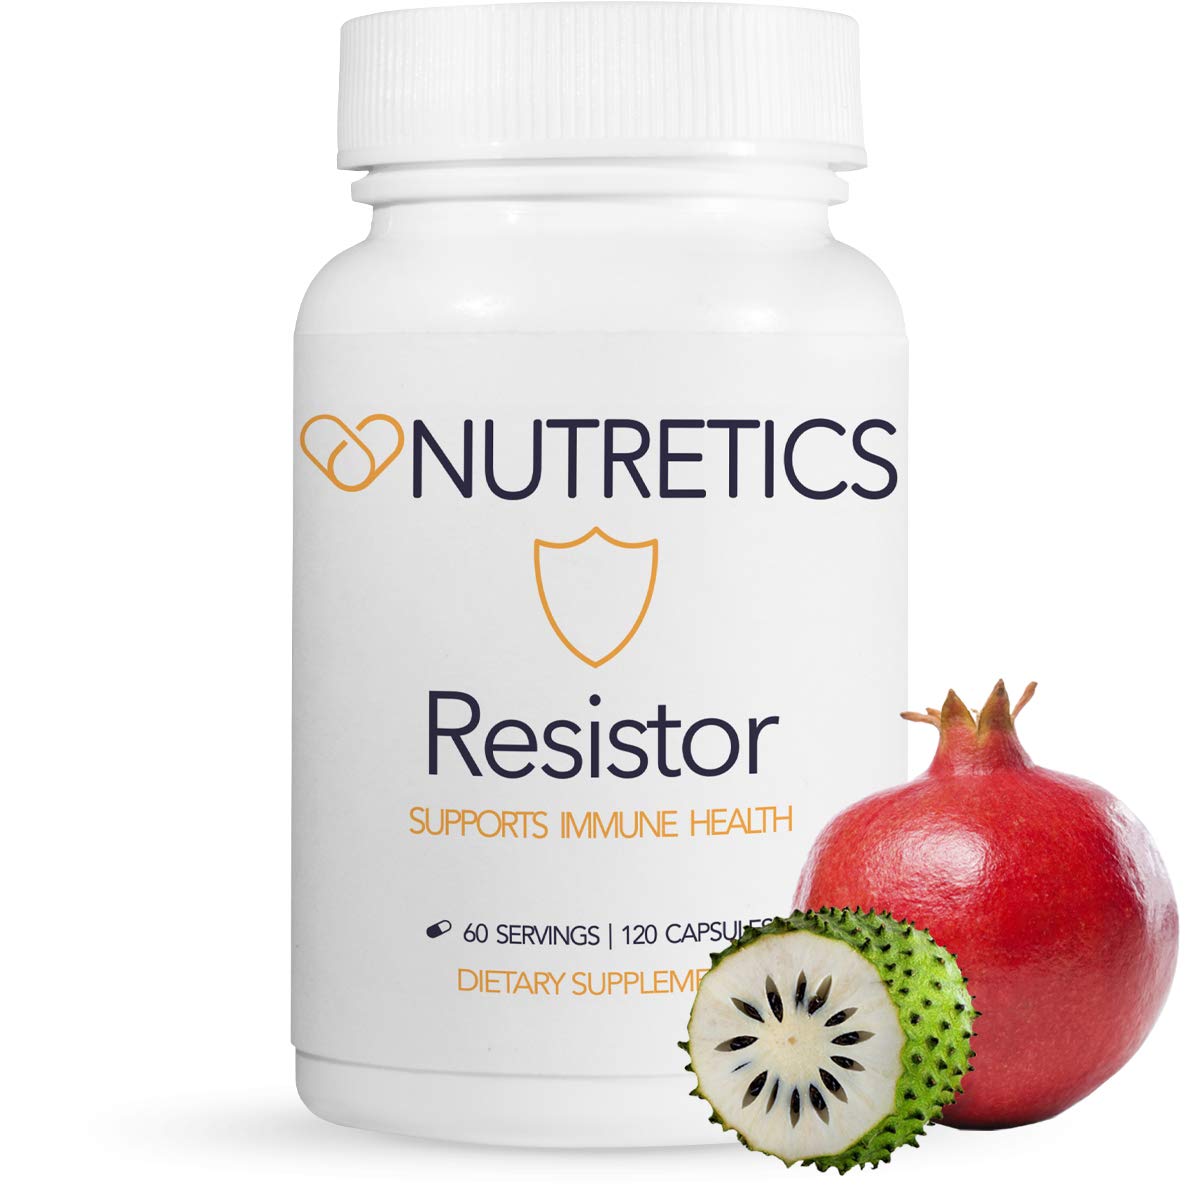 Nutretics Resistor Total Immune System Support Supplement (120 Capsules) Powerful Antioxidant with 20 Natural Nutrients for Immune System Booster, ...